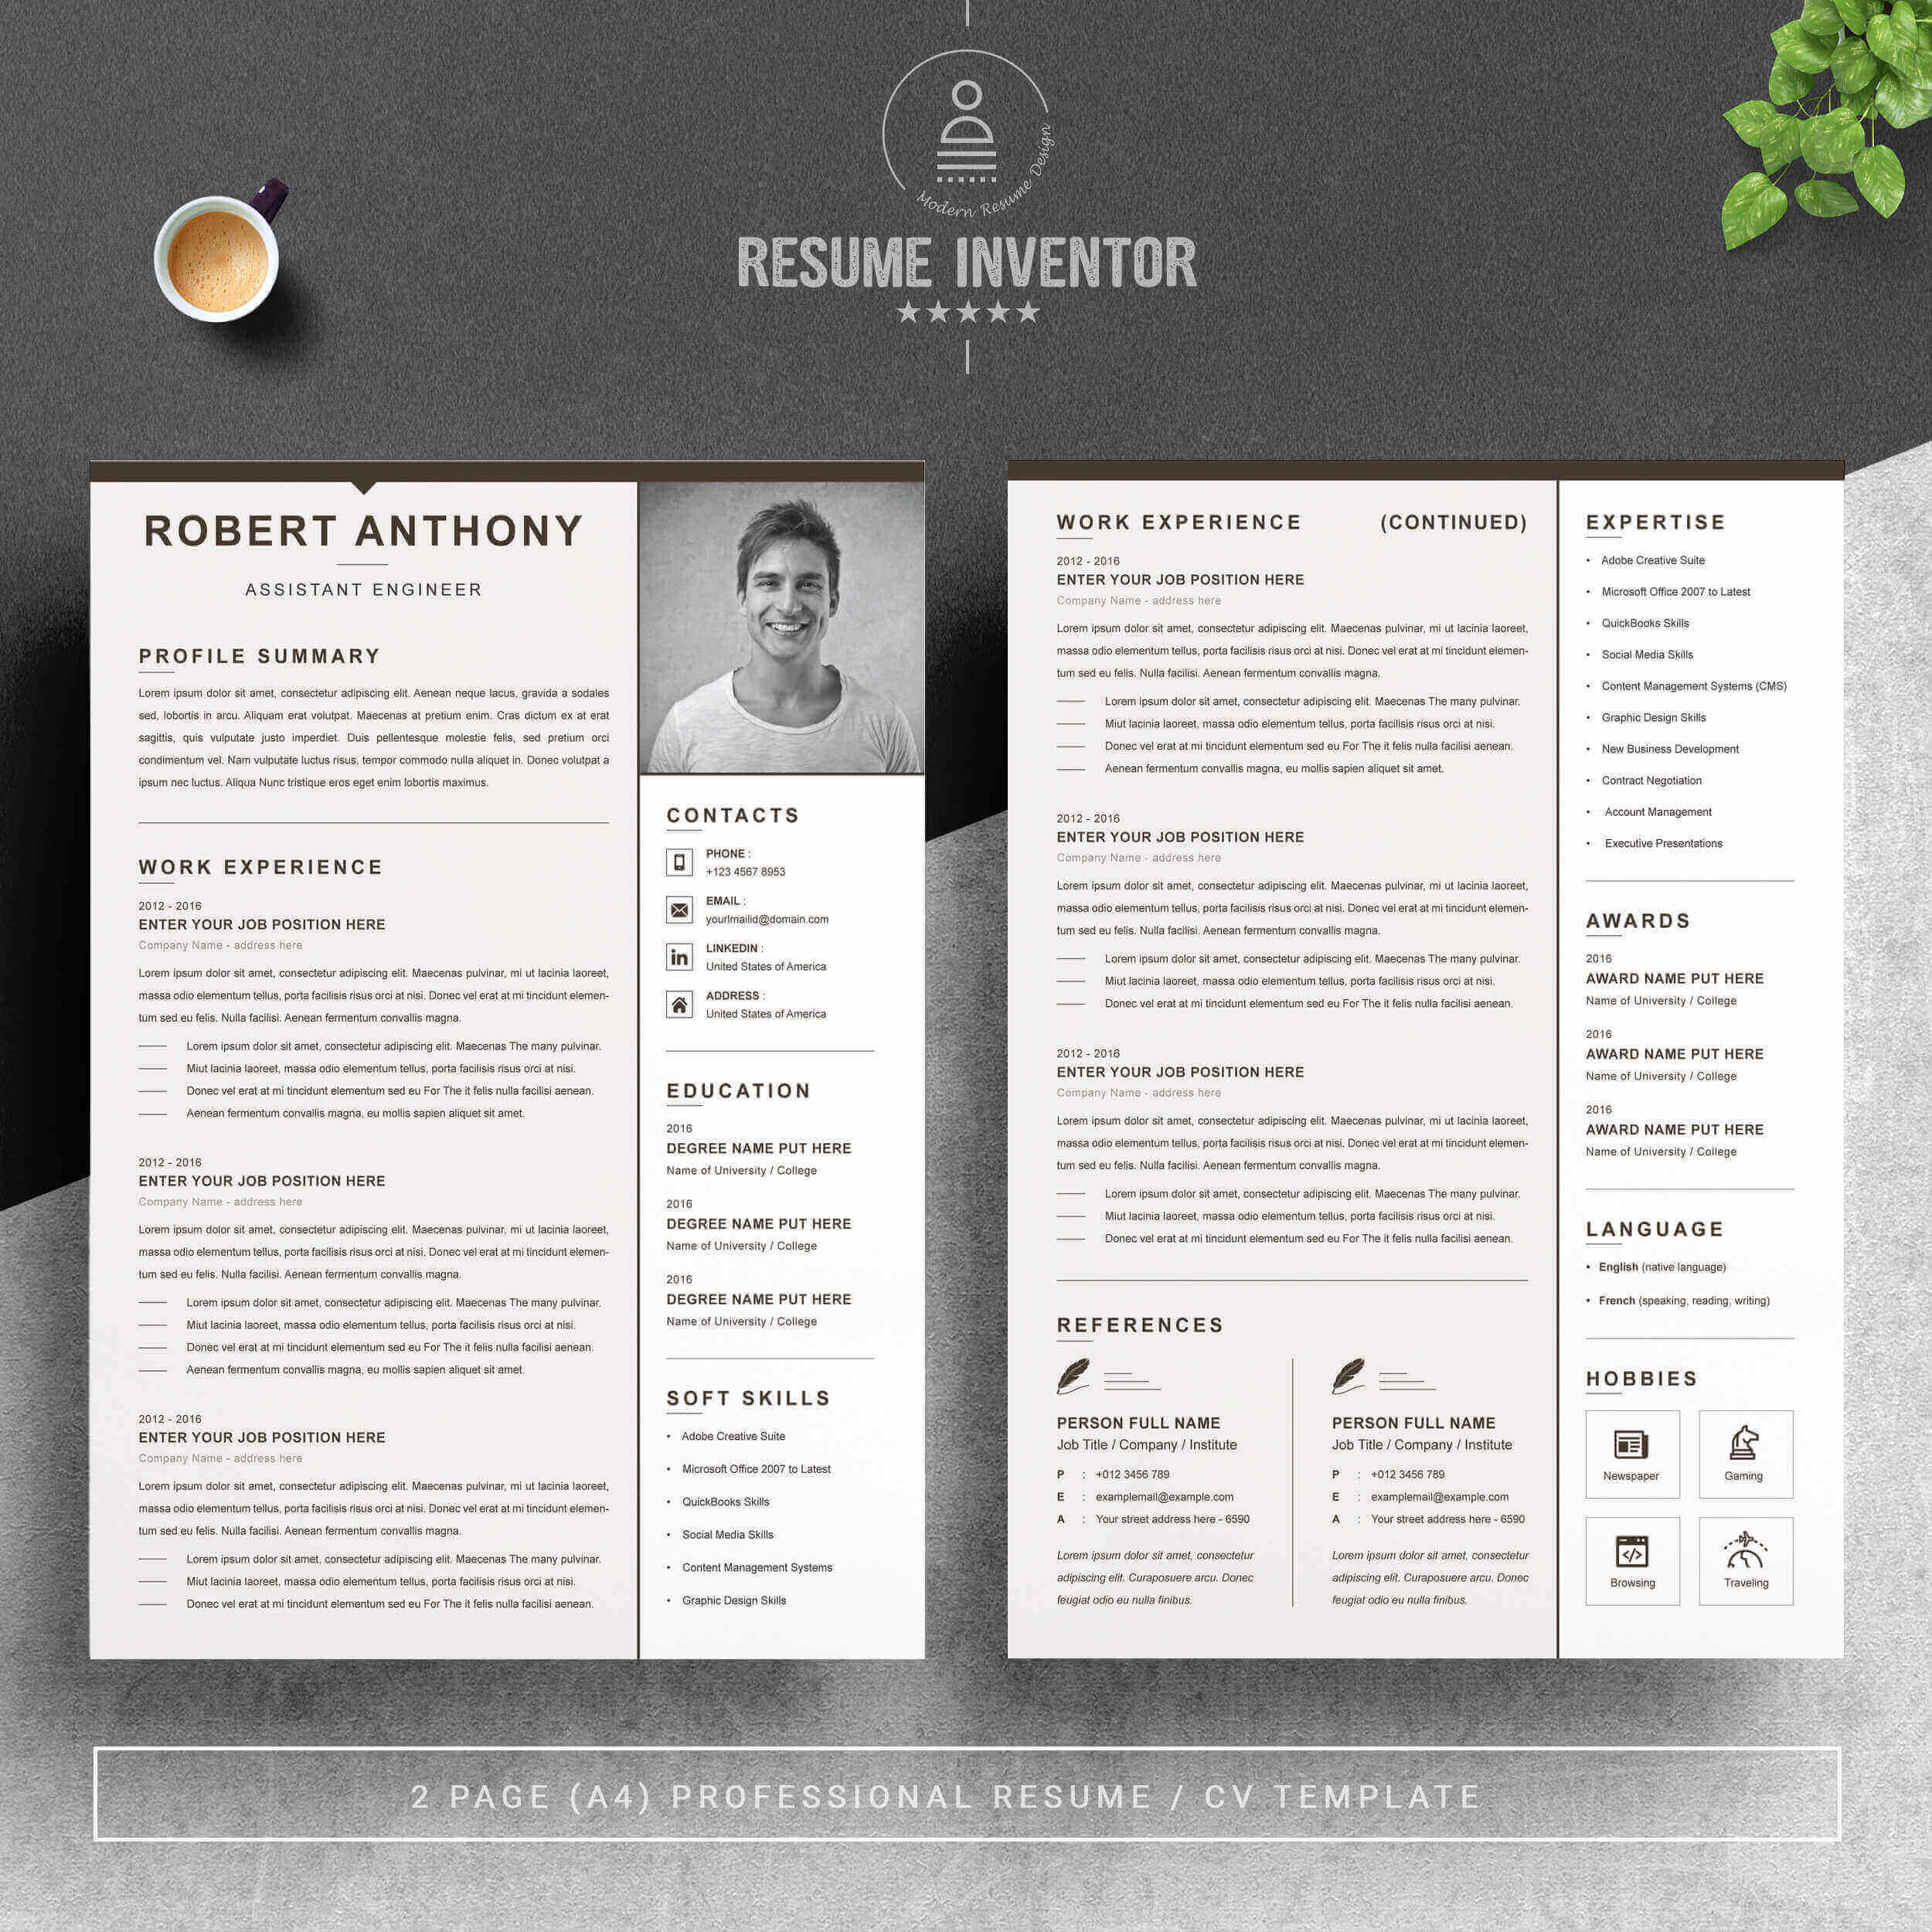 Assistant Engineer Resume & CV Template | Modern PSD Resume Template preview image.